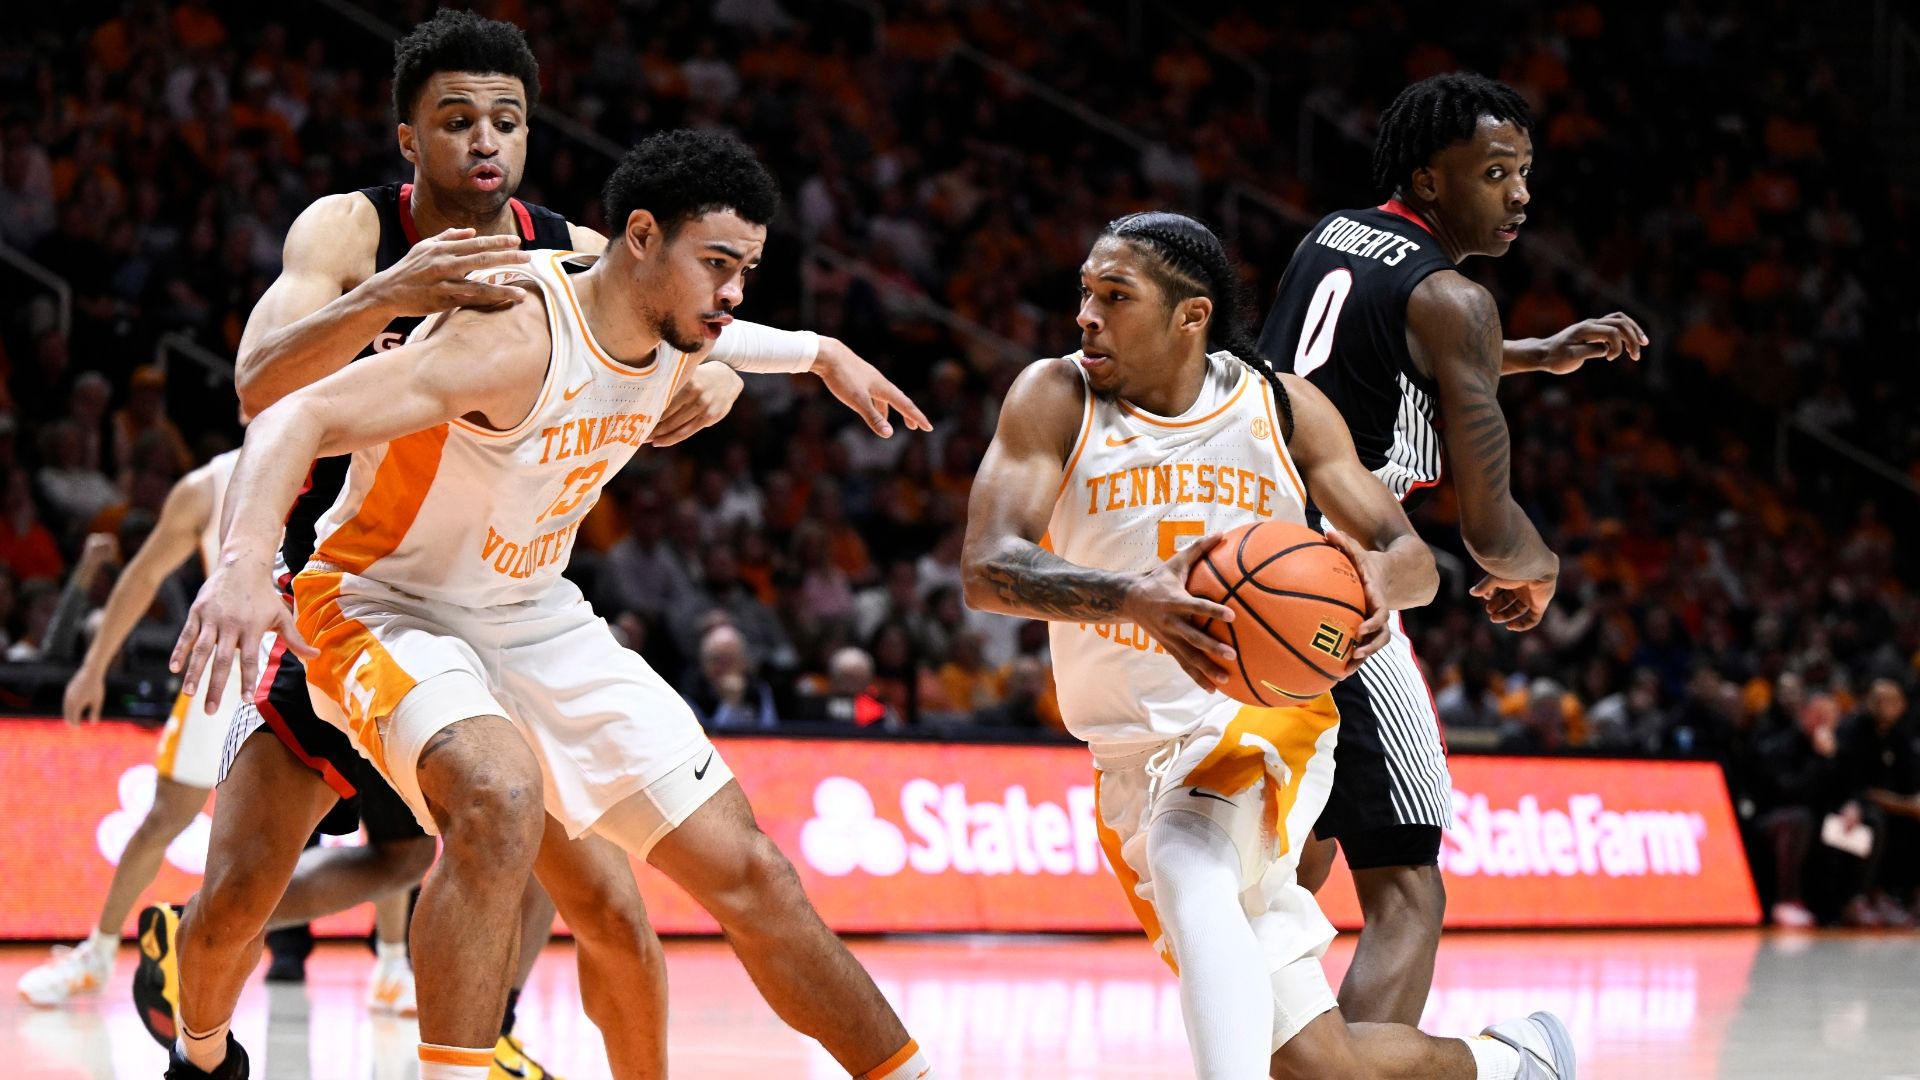 Vols not the flashiest, but most balanced team in SEC